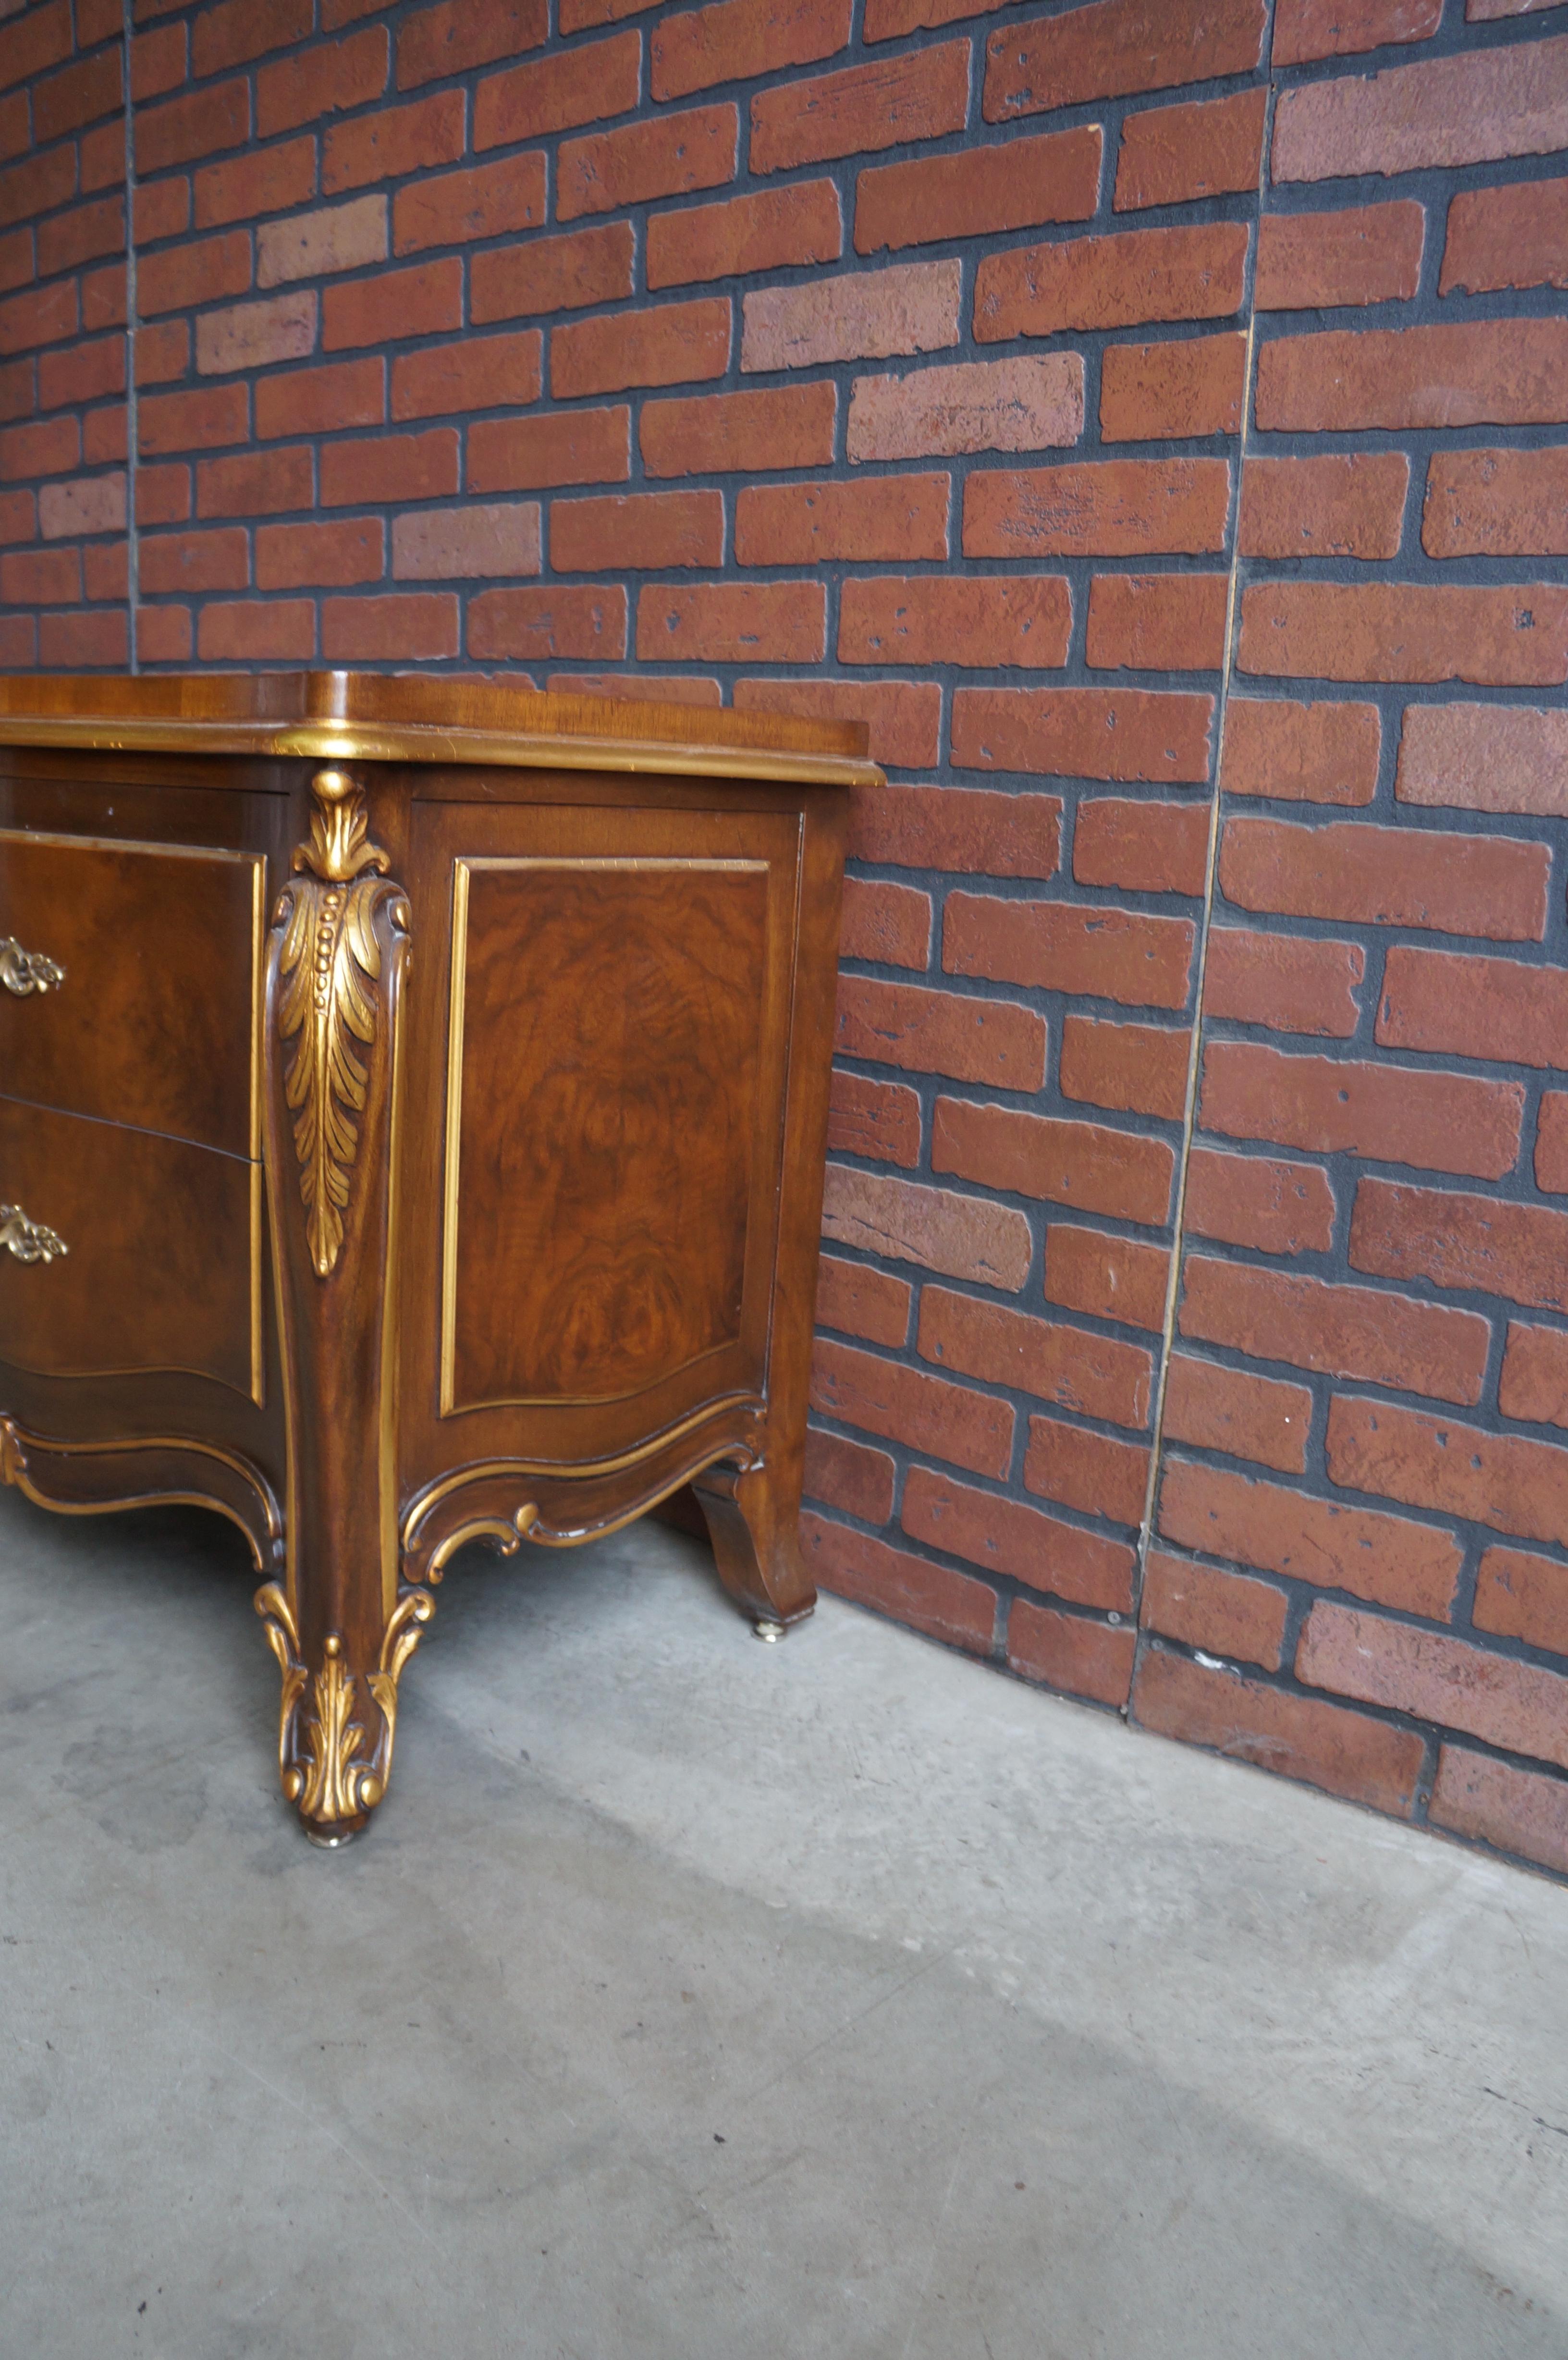 French Provincial styling is exhibited with this nightstand by Karges. The curvaceous silhouette is sexy and romantic. Carved details down the sides and the sweet hardware give this nightstand its French attitude. Gold accents are the perfect